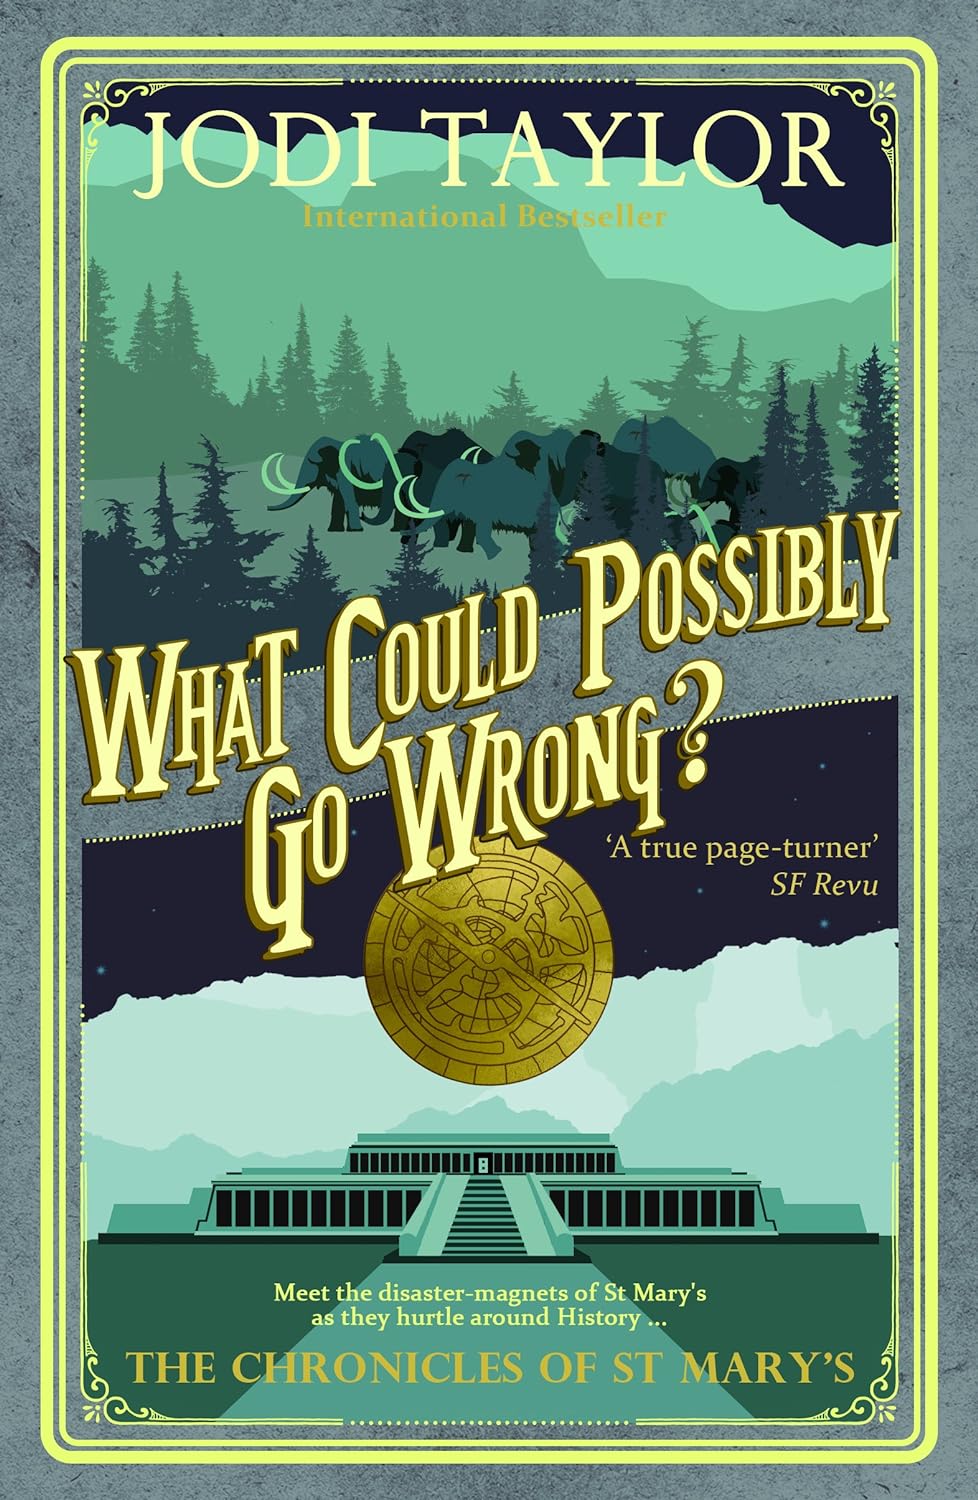 Jodi Taylor: What Could Possibly Go Wrong? (2015, Accent Press (UK))